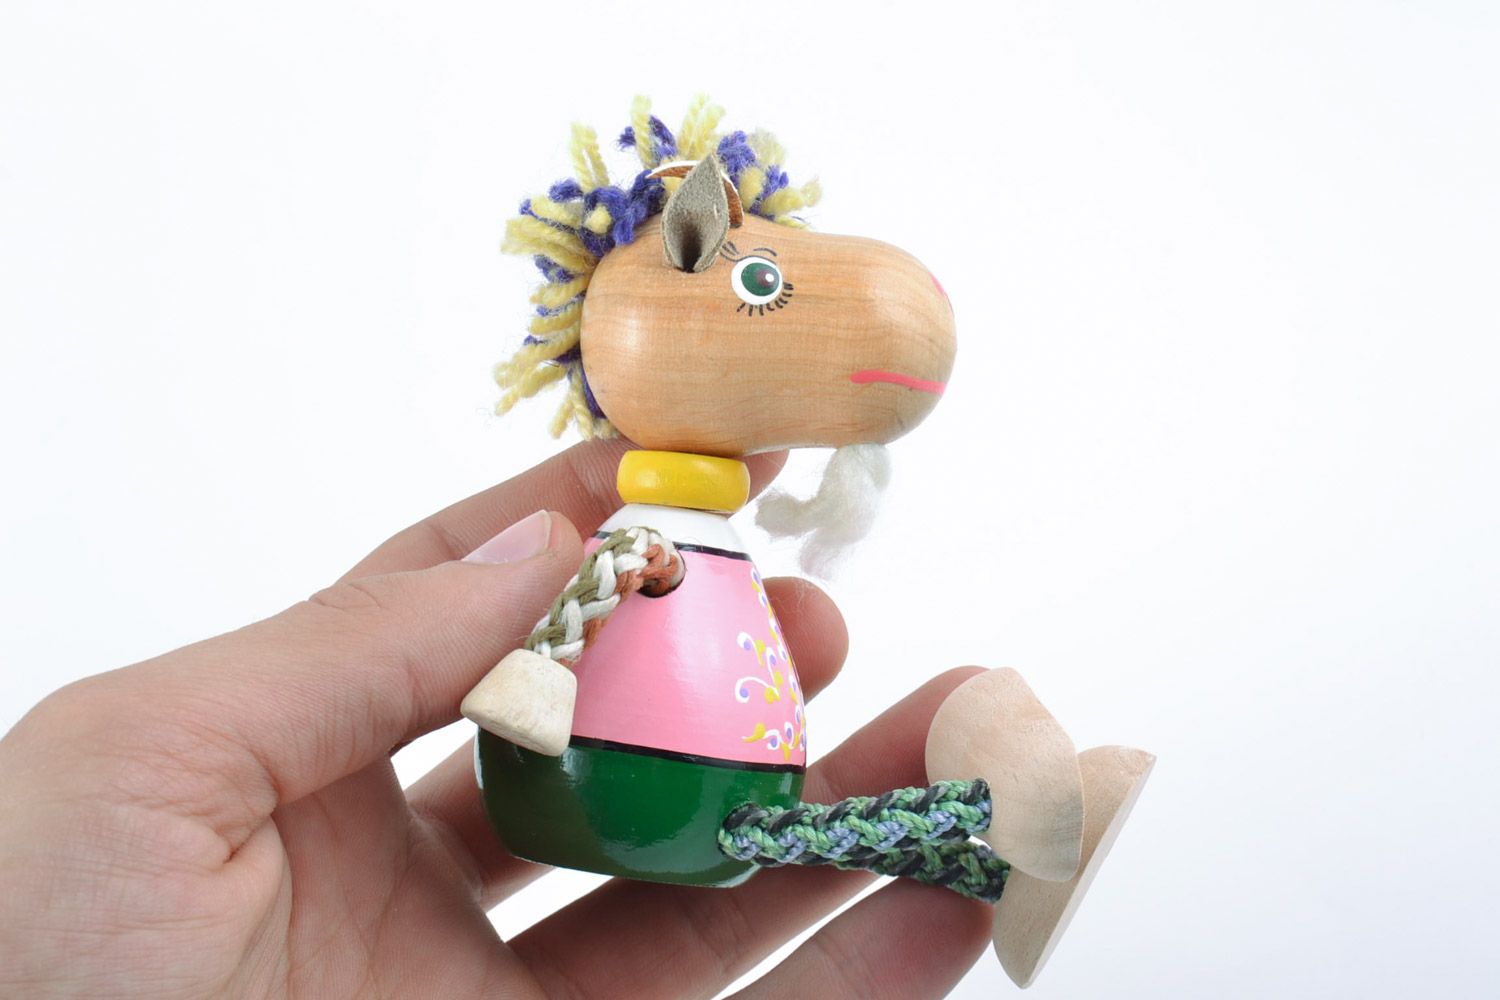 Homemade painted wooden eco toy goat for children and home interior photo 2